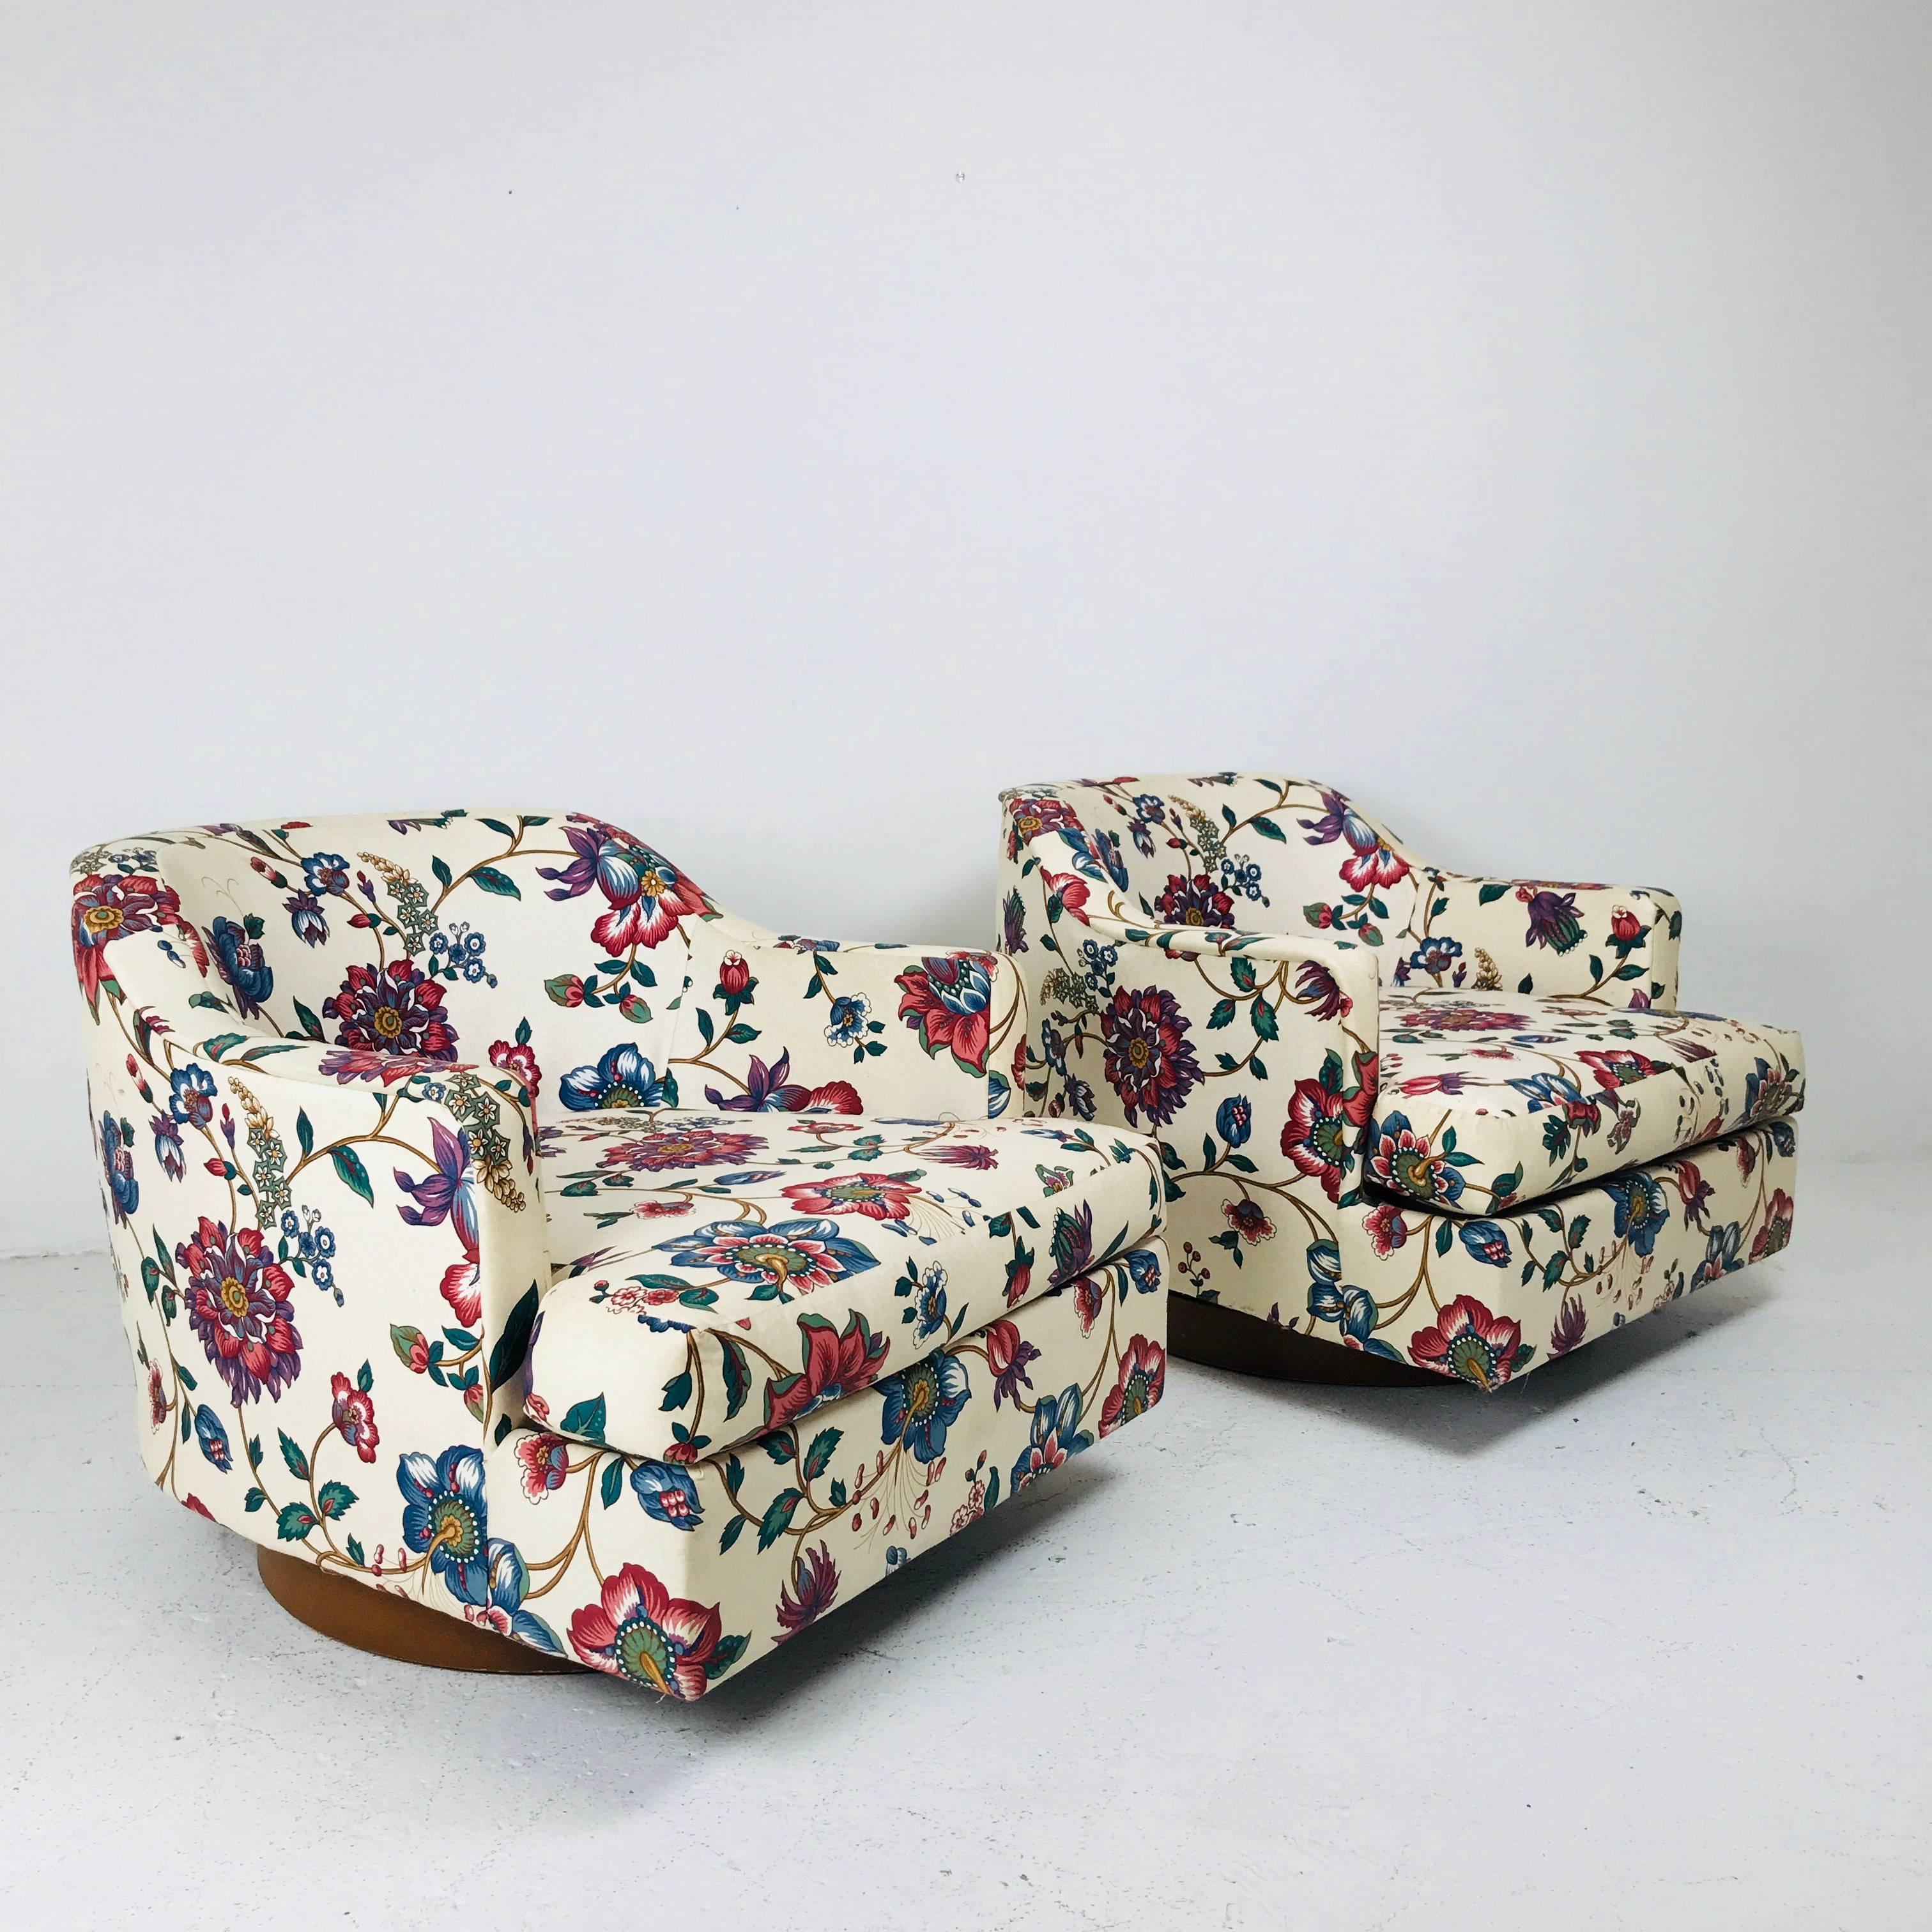 20th Century Pair of Floral Swivel Chairs in the Style of Milo Baughman.